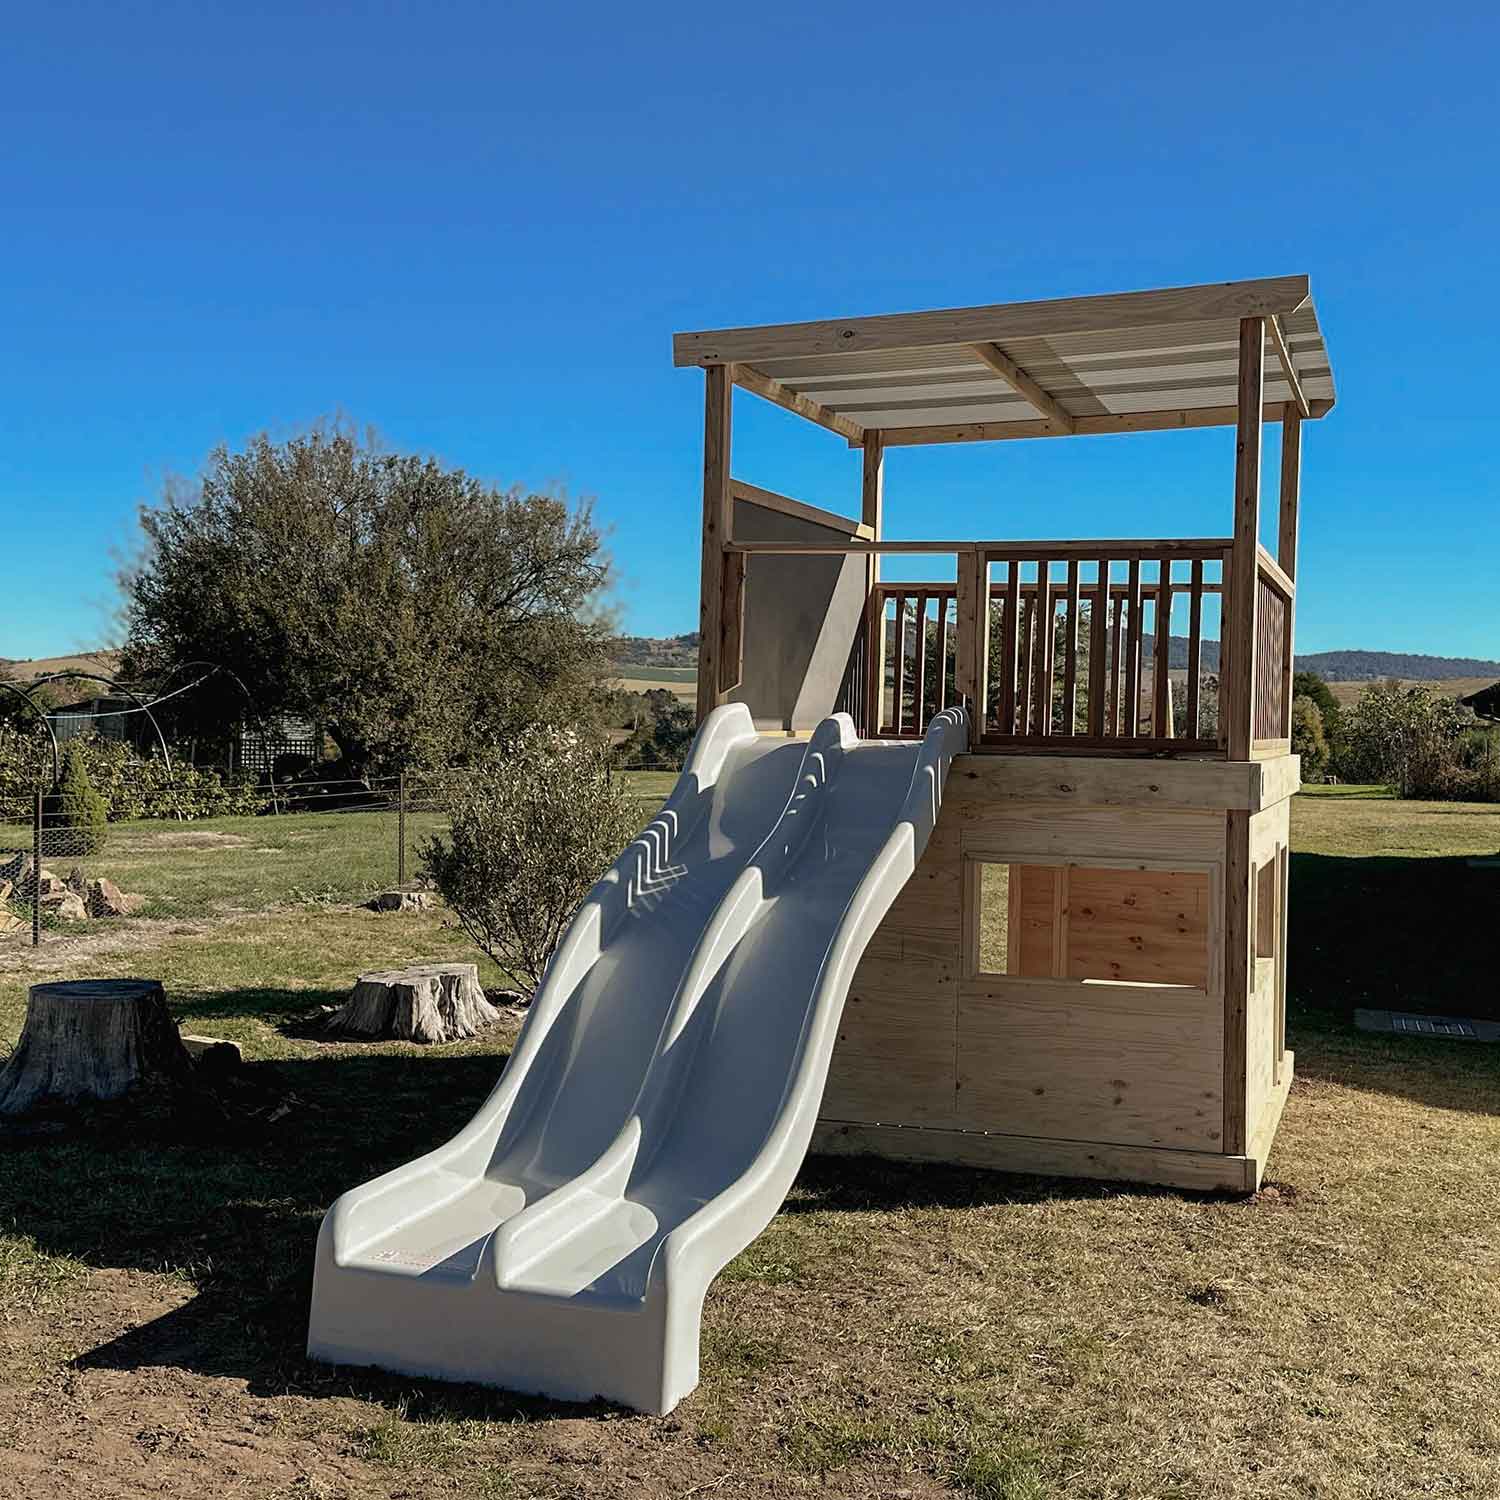 Timber Raised Platform Cubby House with Slide - For Primary Schools & Early Learning Centres - Hand Built in Australia by Castle & Cubby.